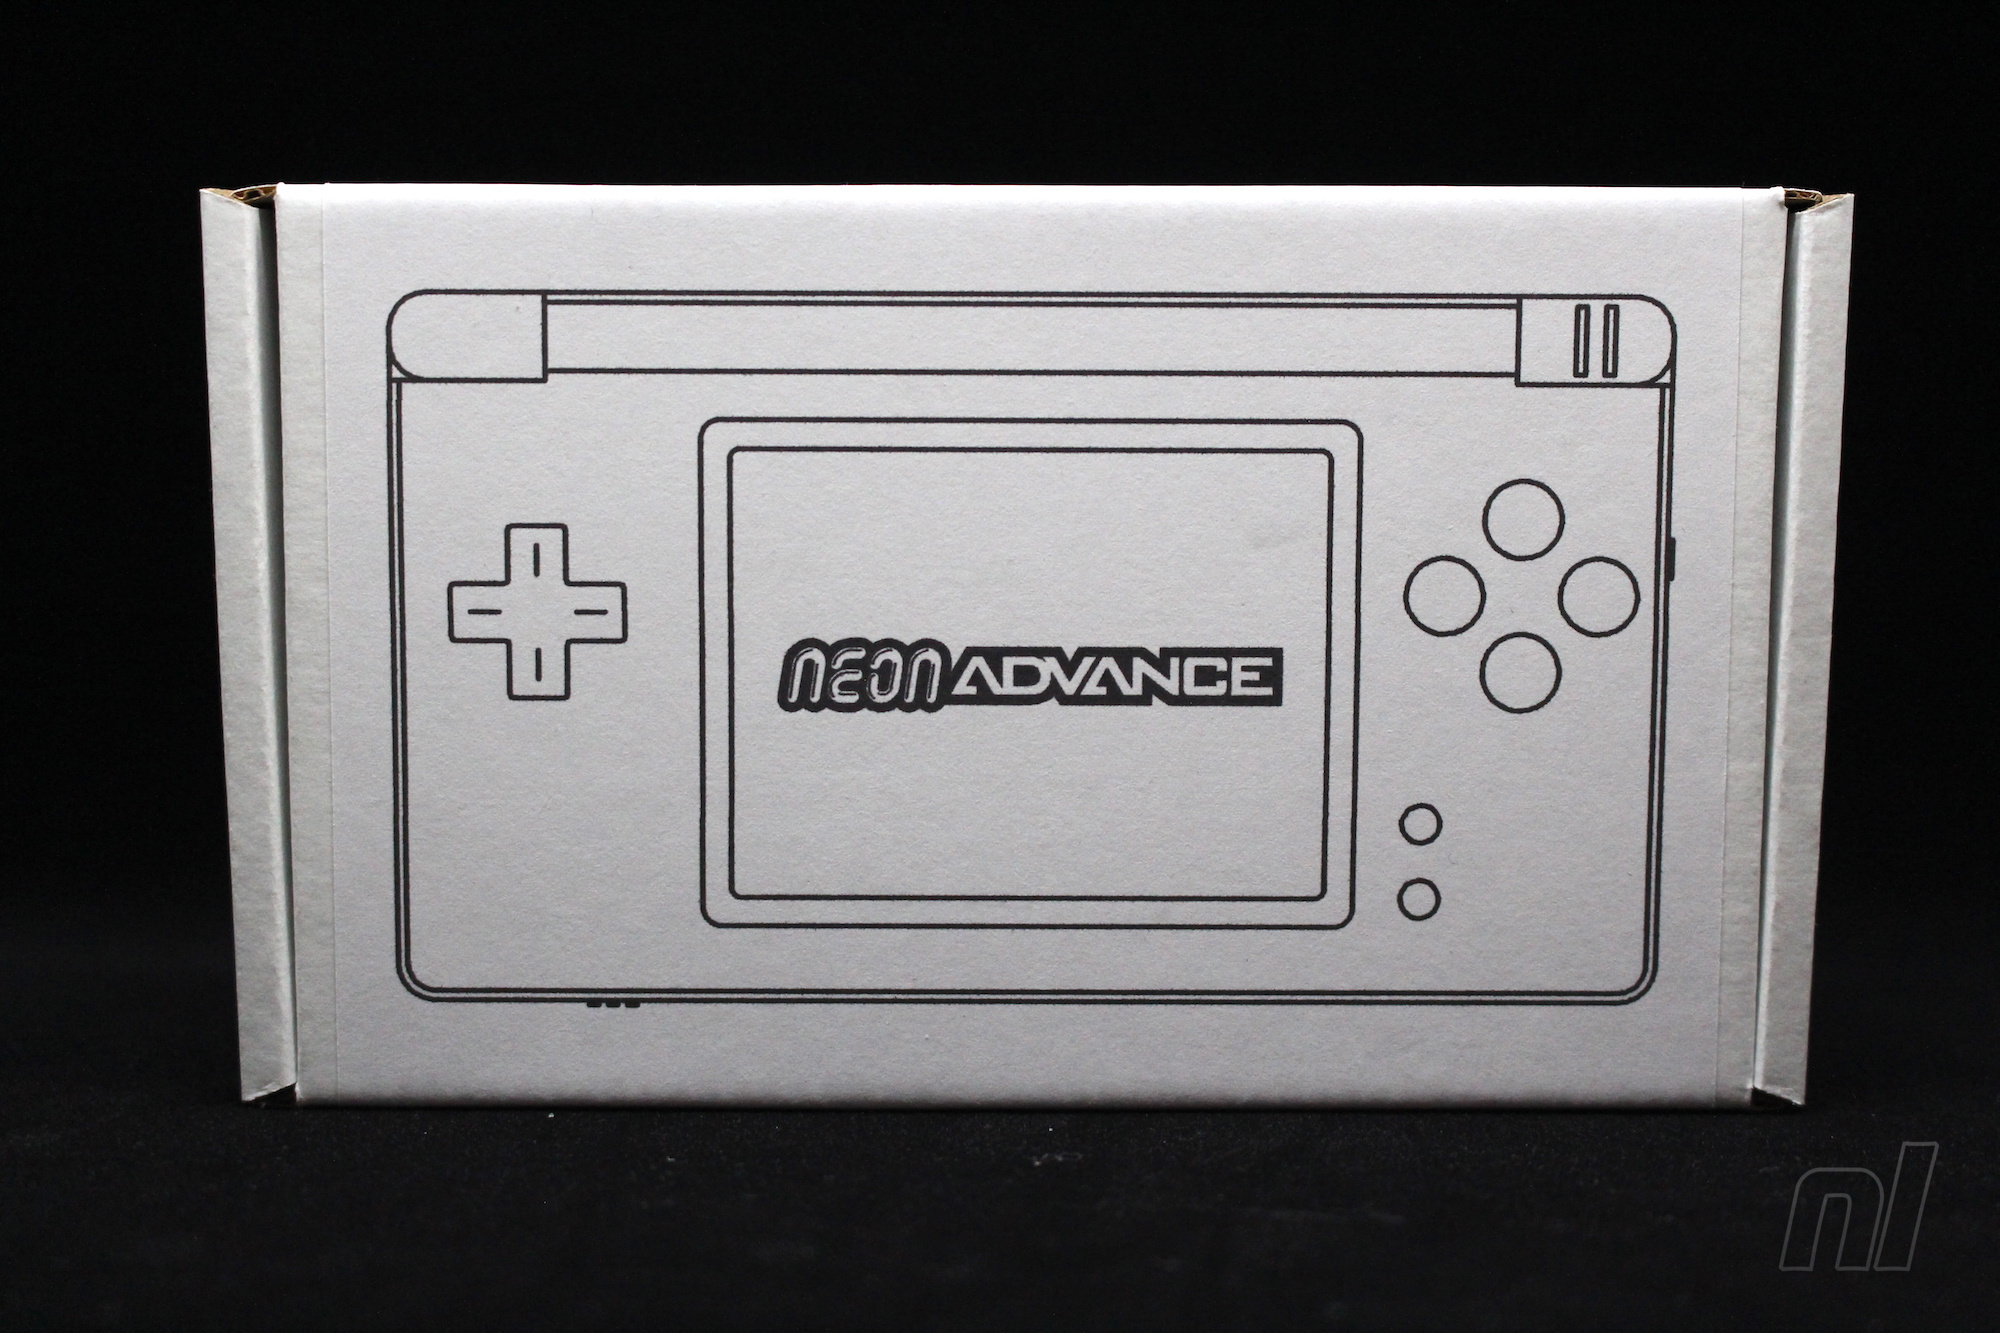 How One Man Is Turning Dead Ds Lites Into Gorgeous Game Boy Advance Systems Feature Nintendo Life